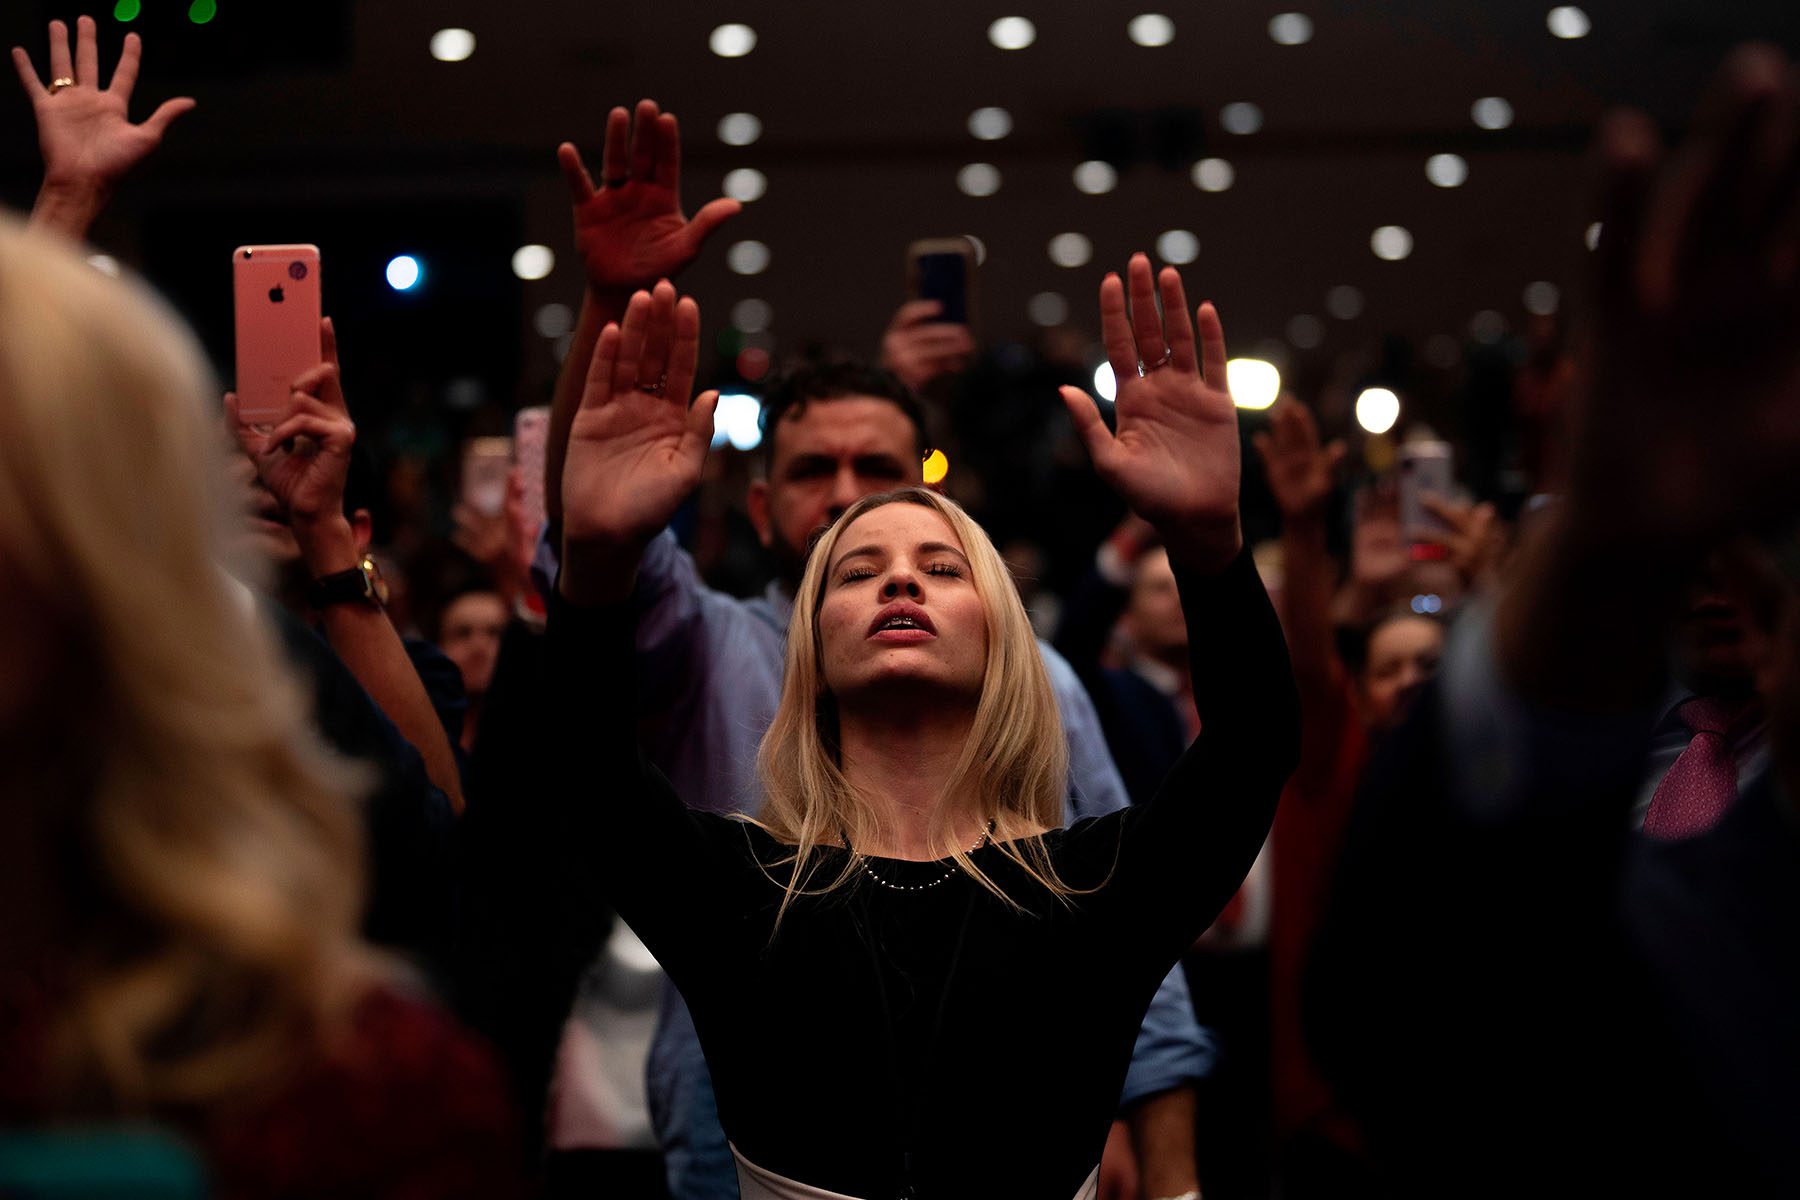 A woman raises both of her hands while she prays with her eyes shut. Around her, people raise their hands and take pictures on their cell phones.